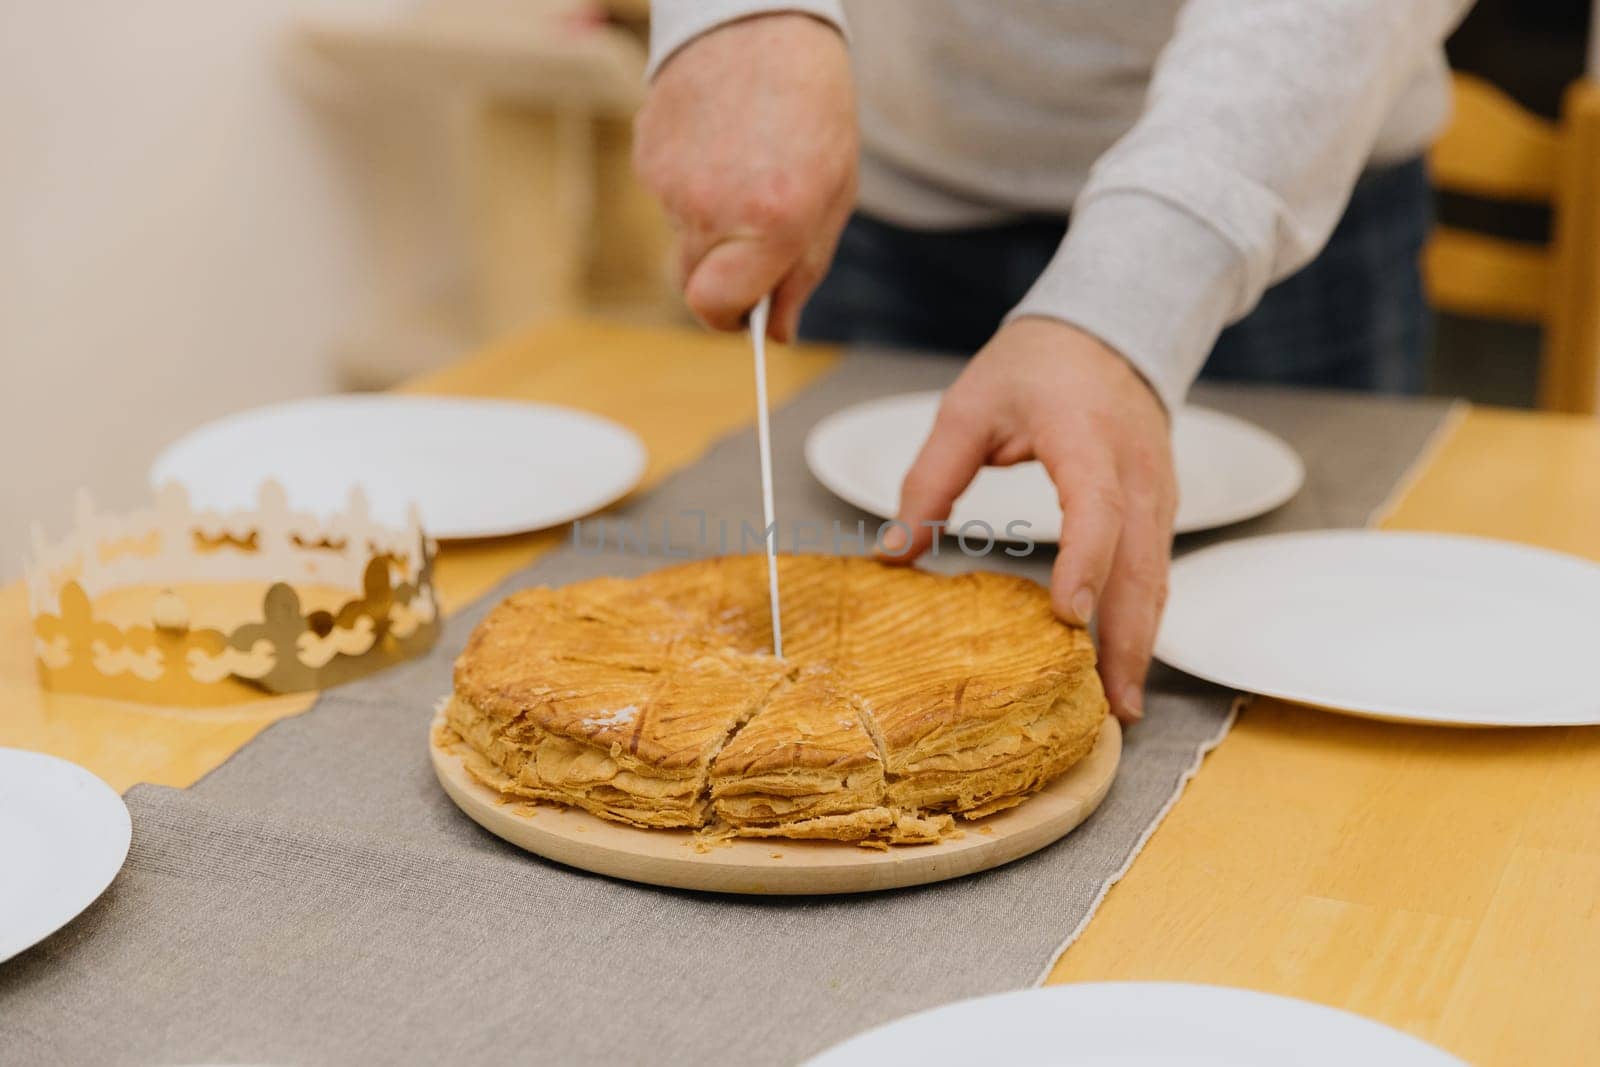 One Caucasian young blurred man cutting a king's galette in a plate on a wooden board using a knife while standing at the table, close-up side view with selective focus.